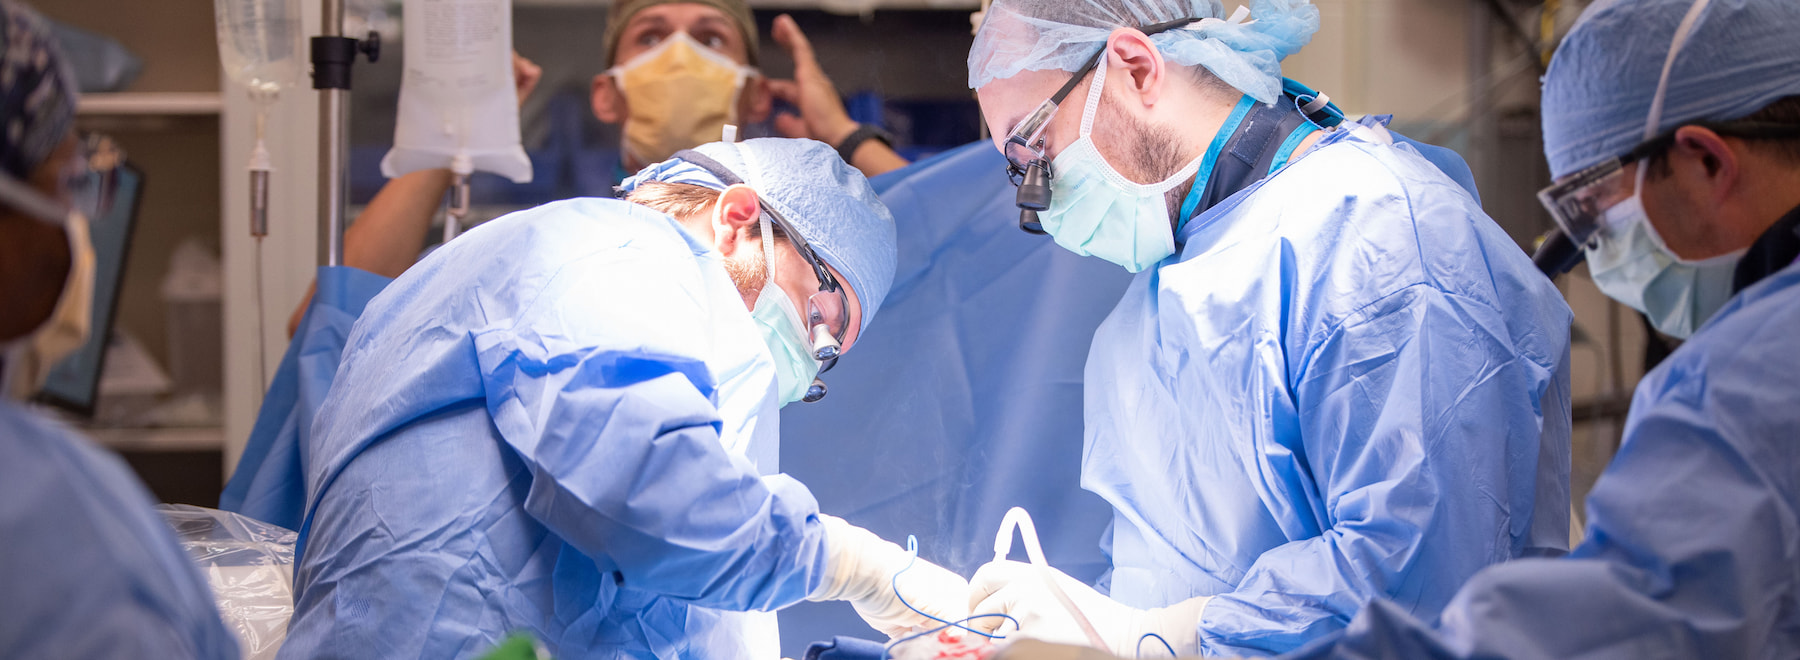 Two neurosurgery residents performing neurosurgical treatment in the OR.